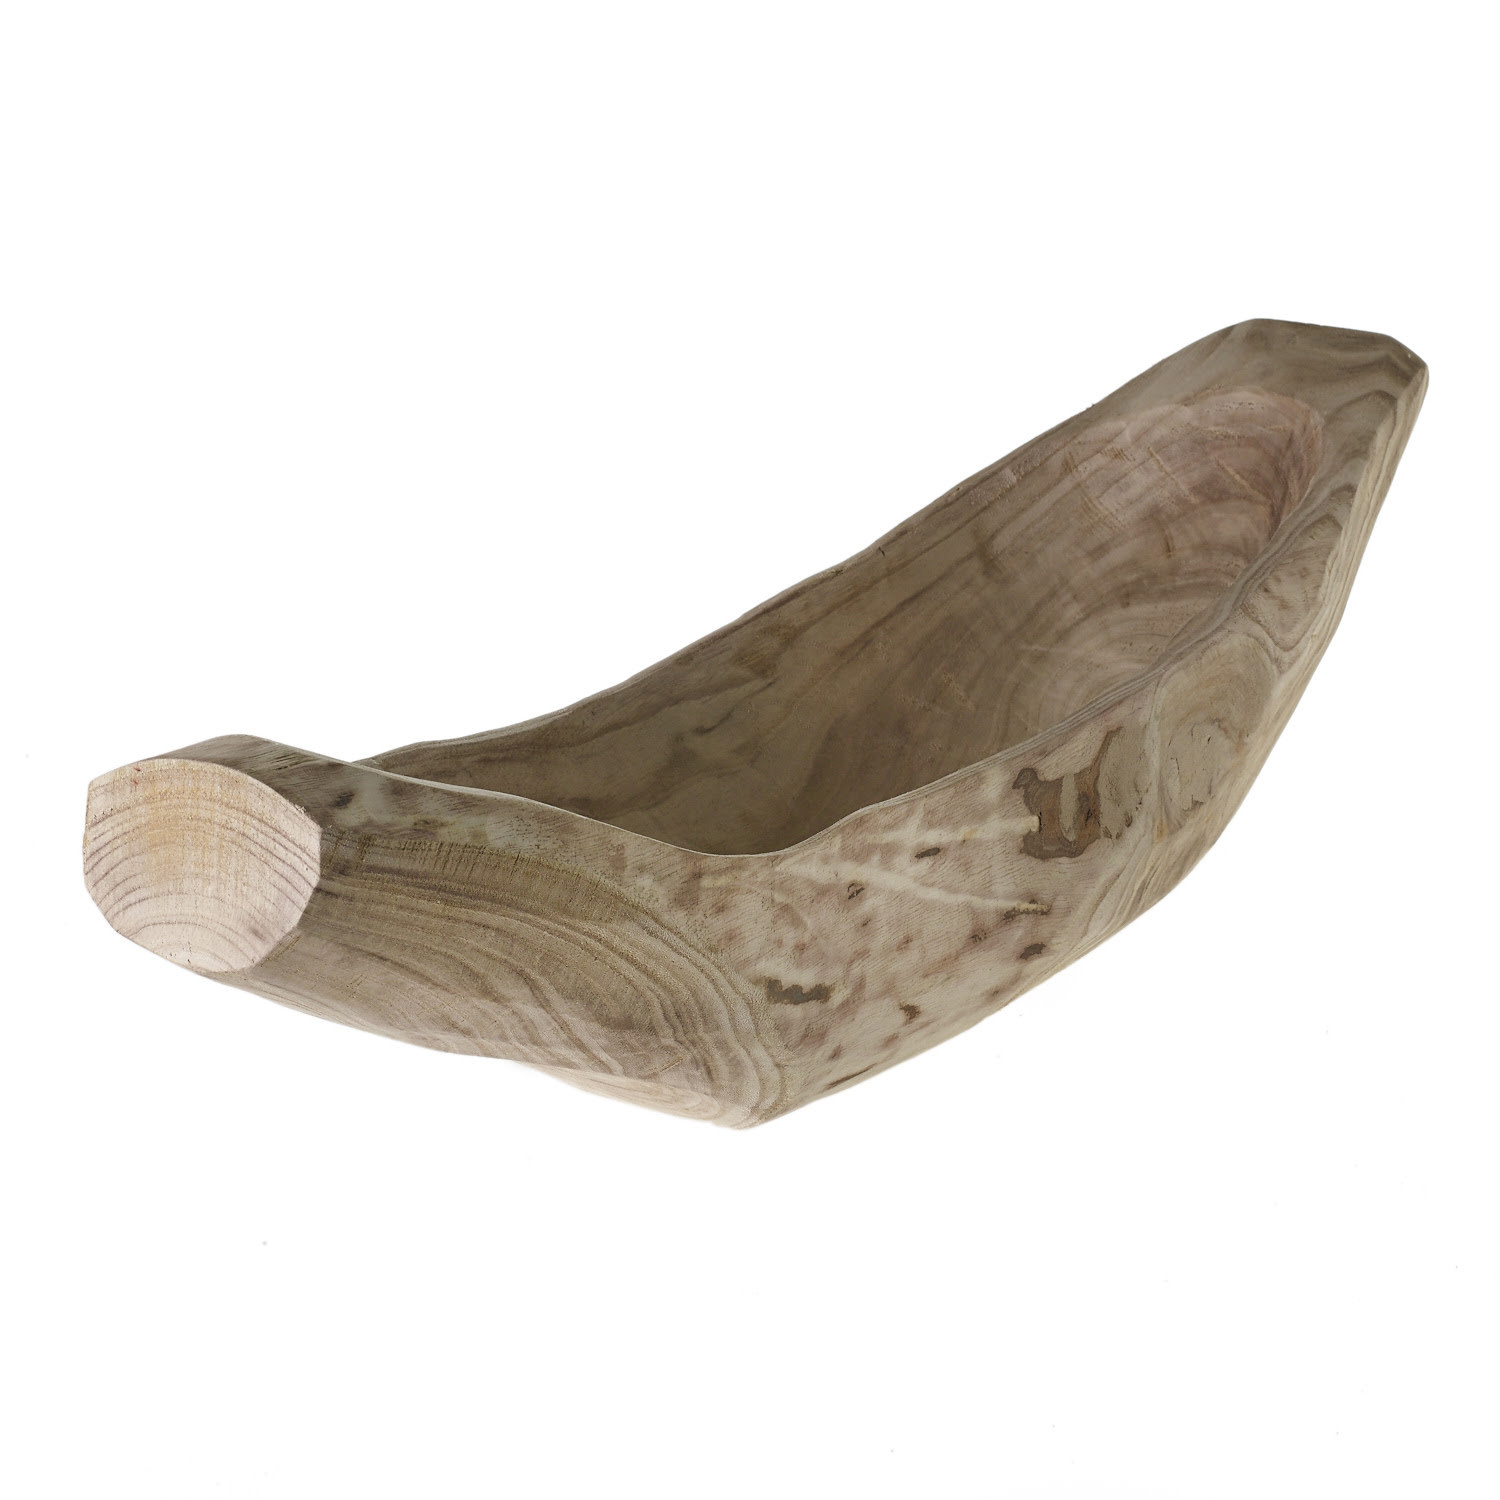 Fortune Wood Boat, Available for local pick up